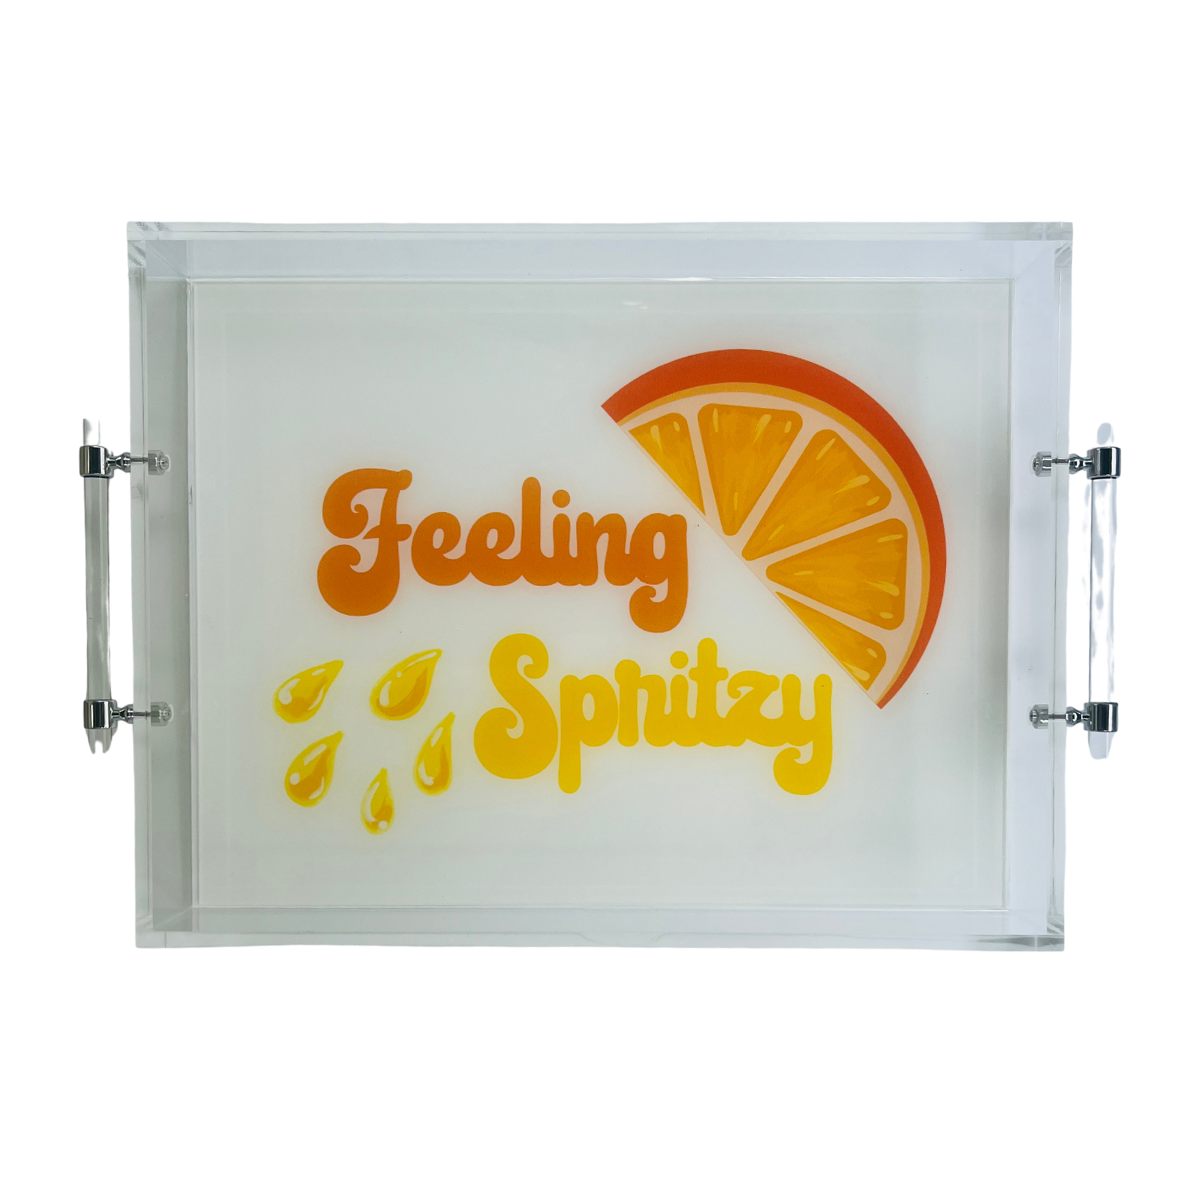 "Feeling Spritzy" Acrylic Serving Tray With Handles, 14" x 18"